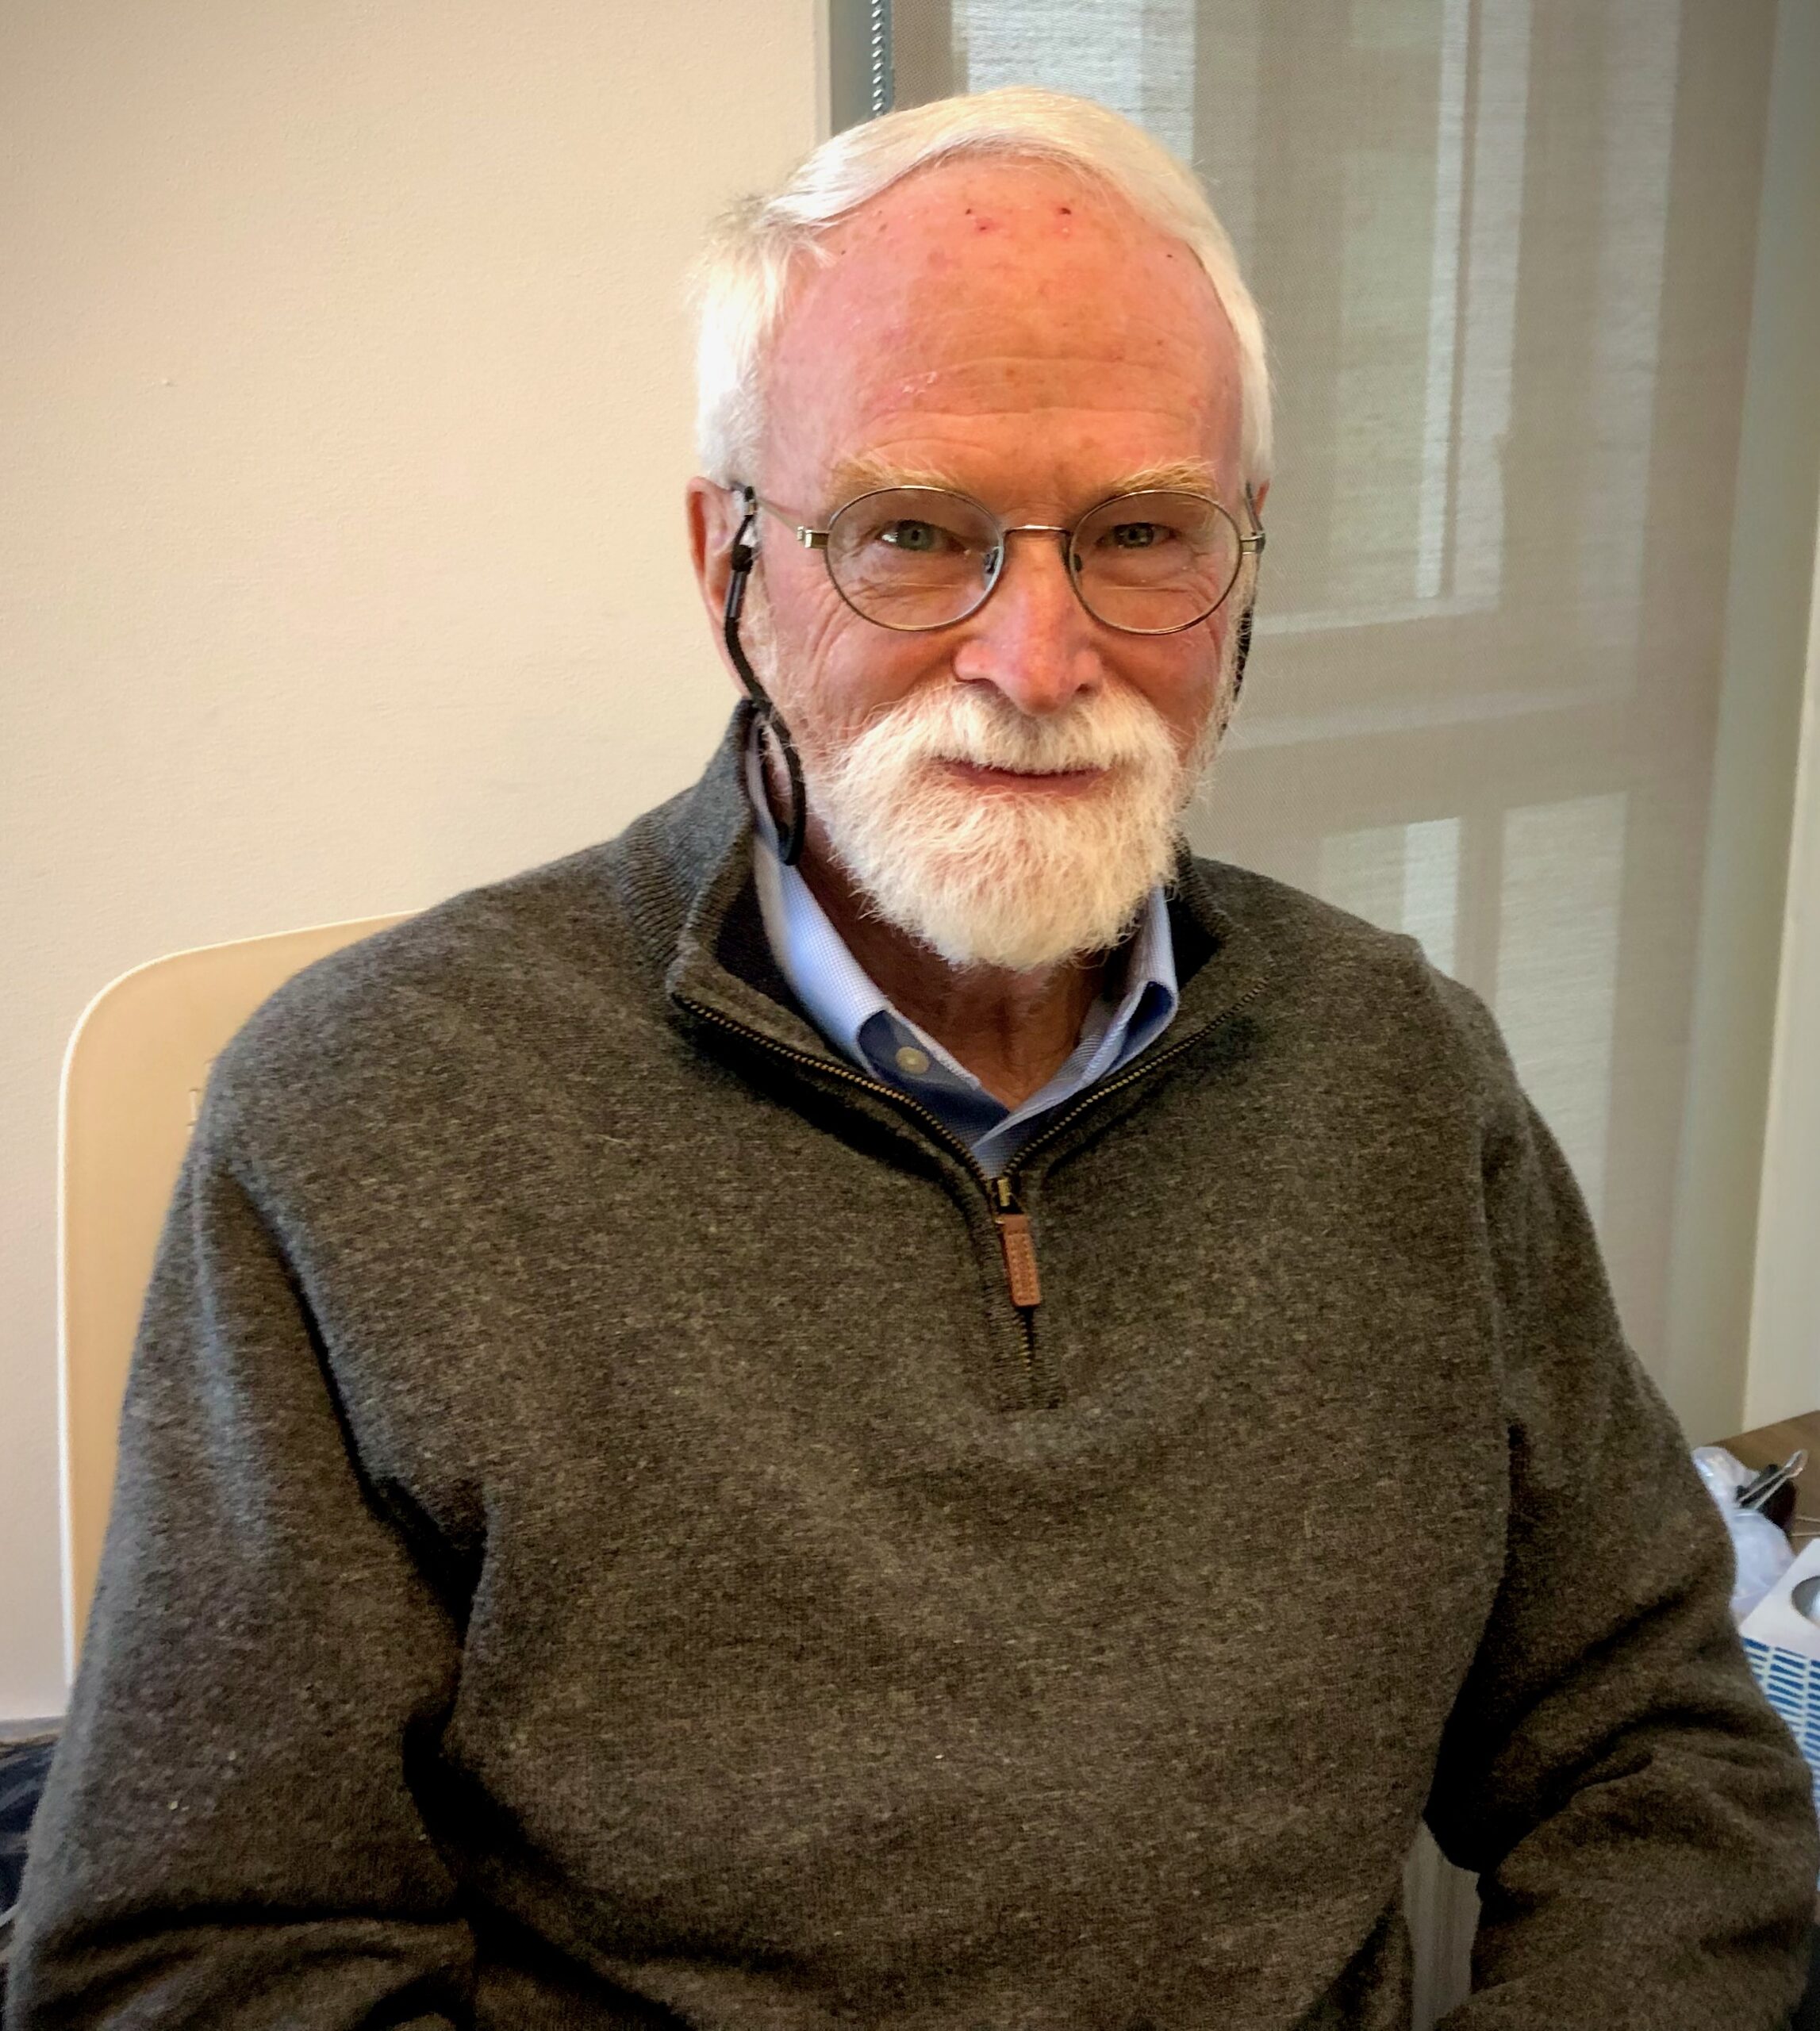 Law professor with white beard and glasses poses in office.